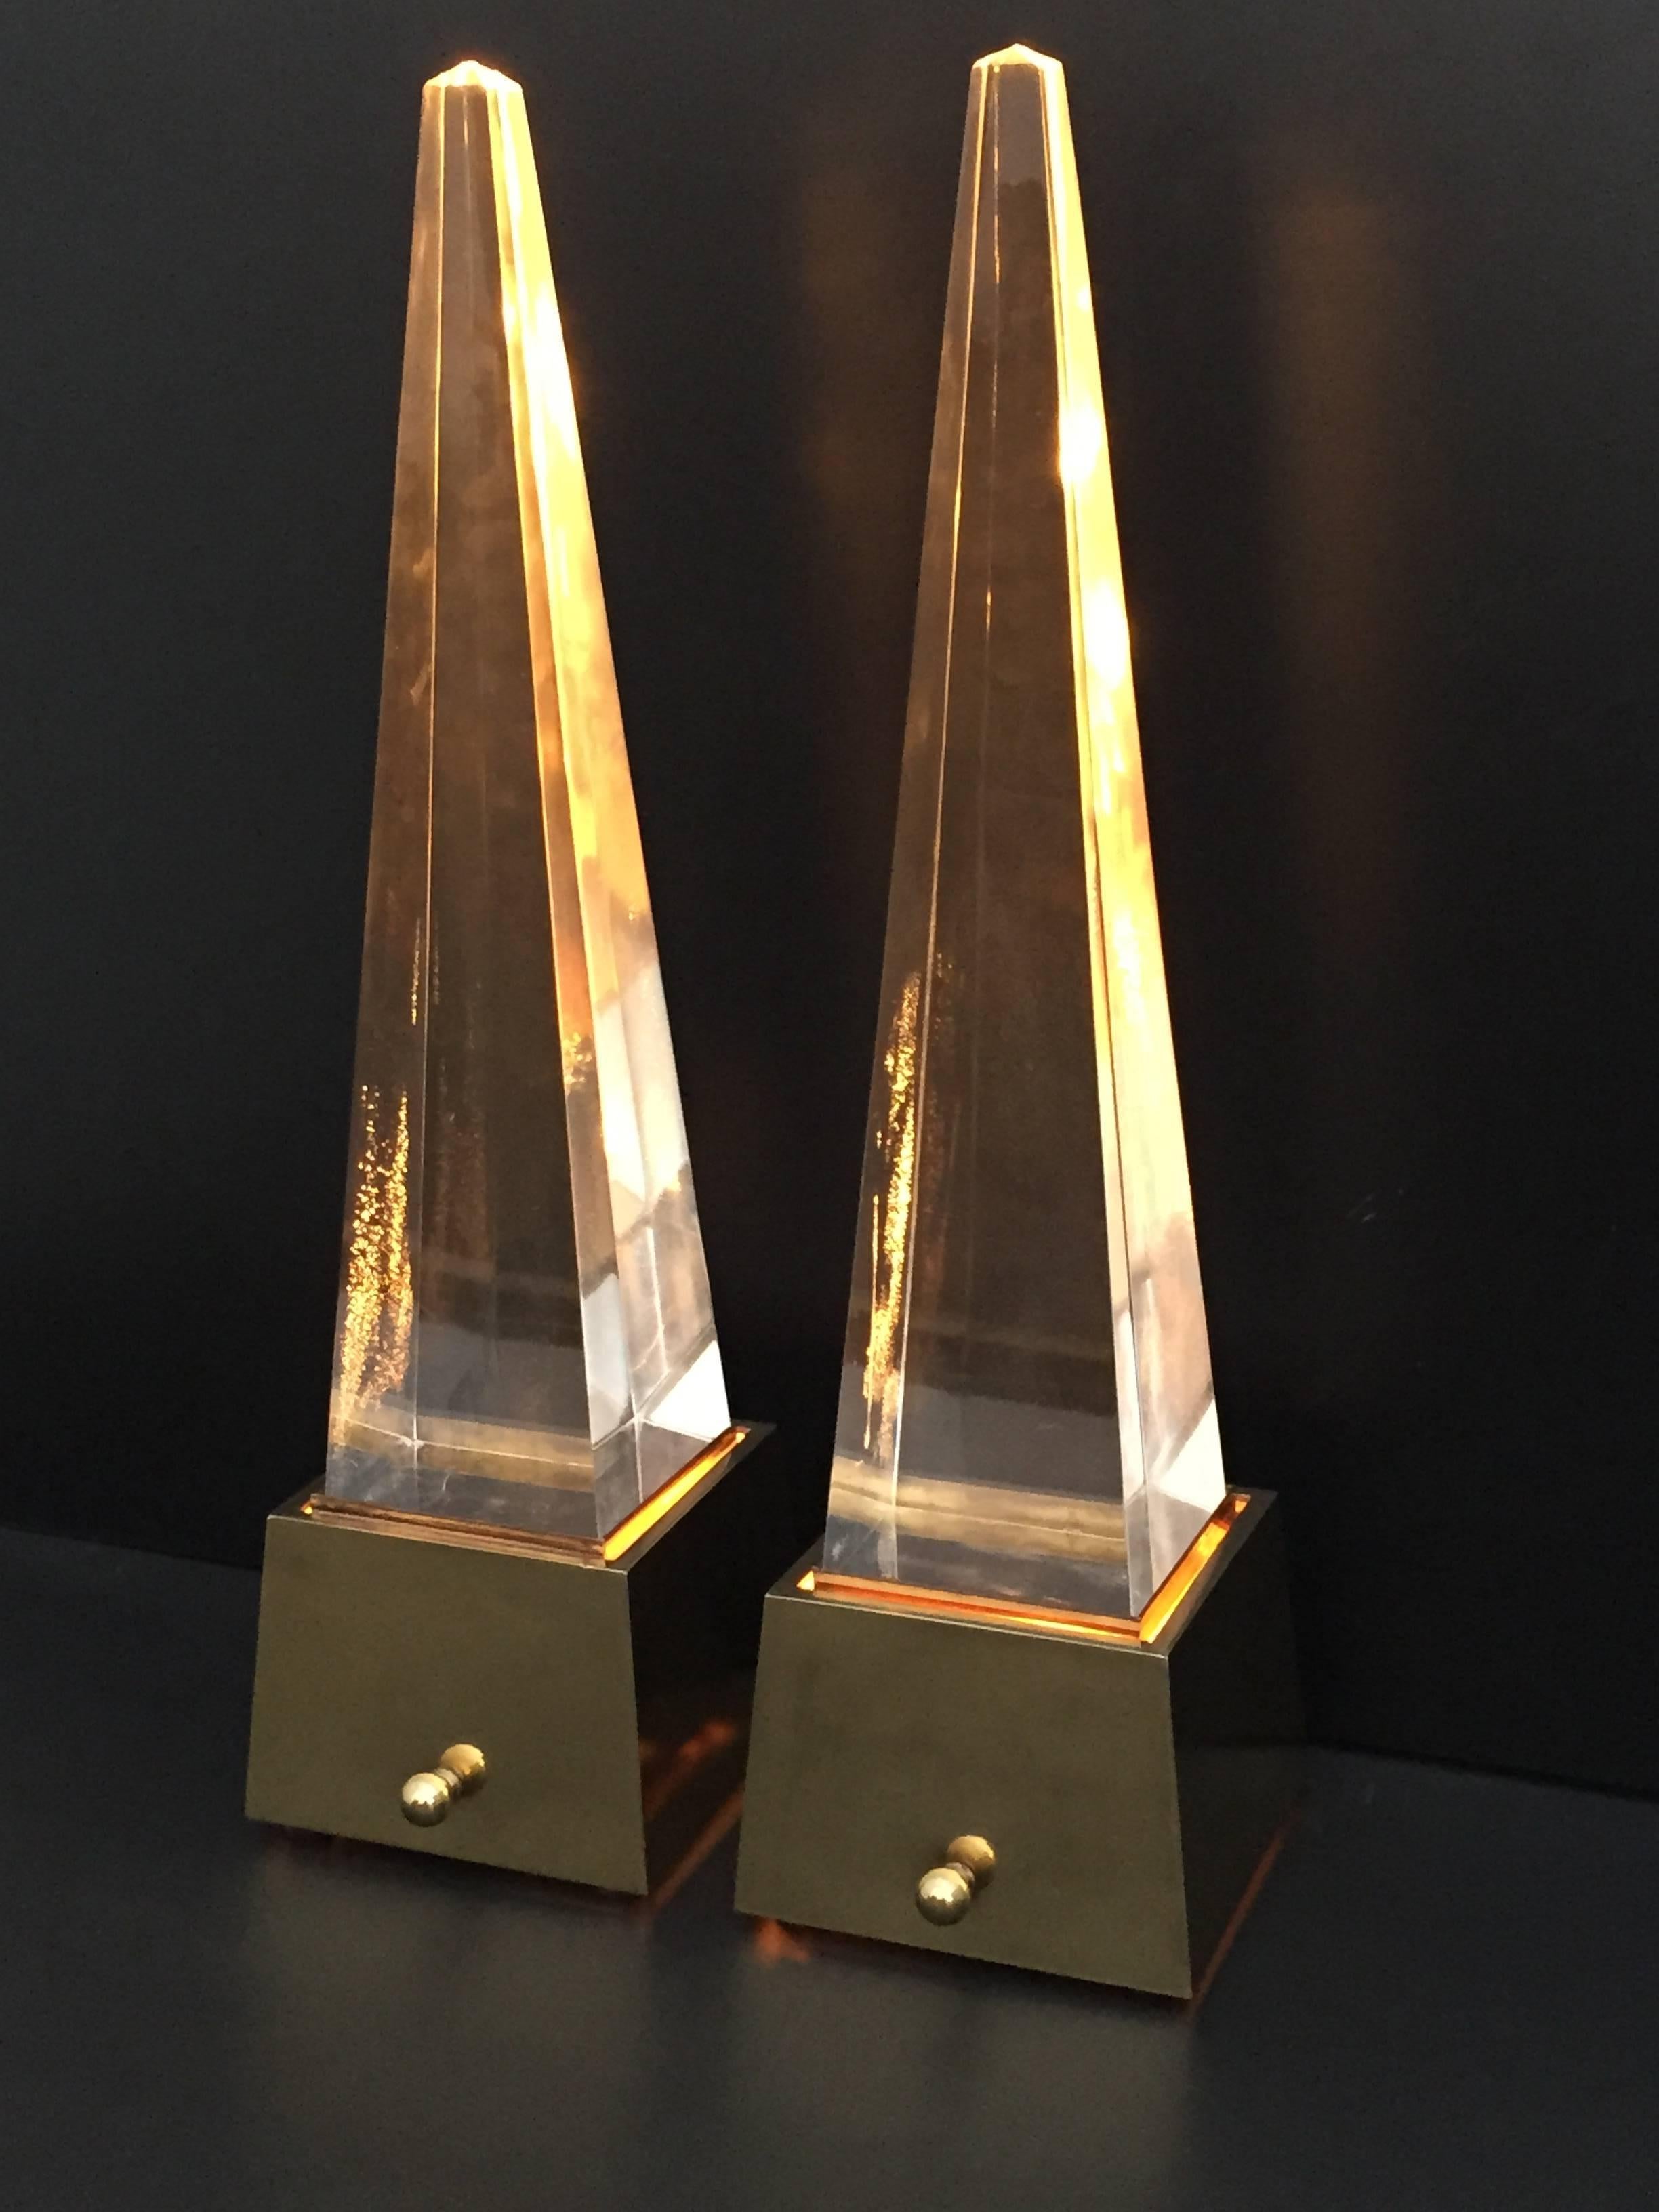 Pair of glamorous brass and lucite pyramid lamps.

